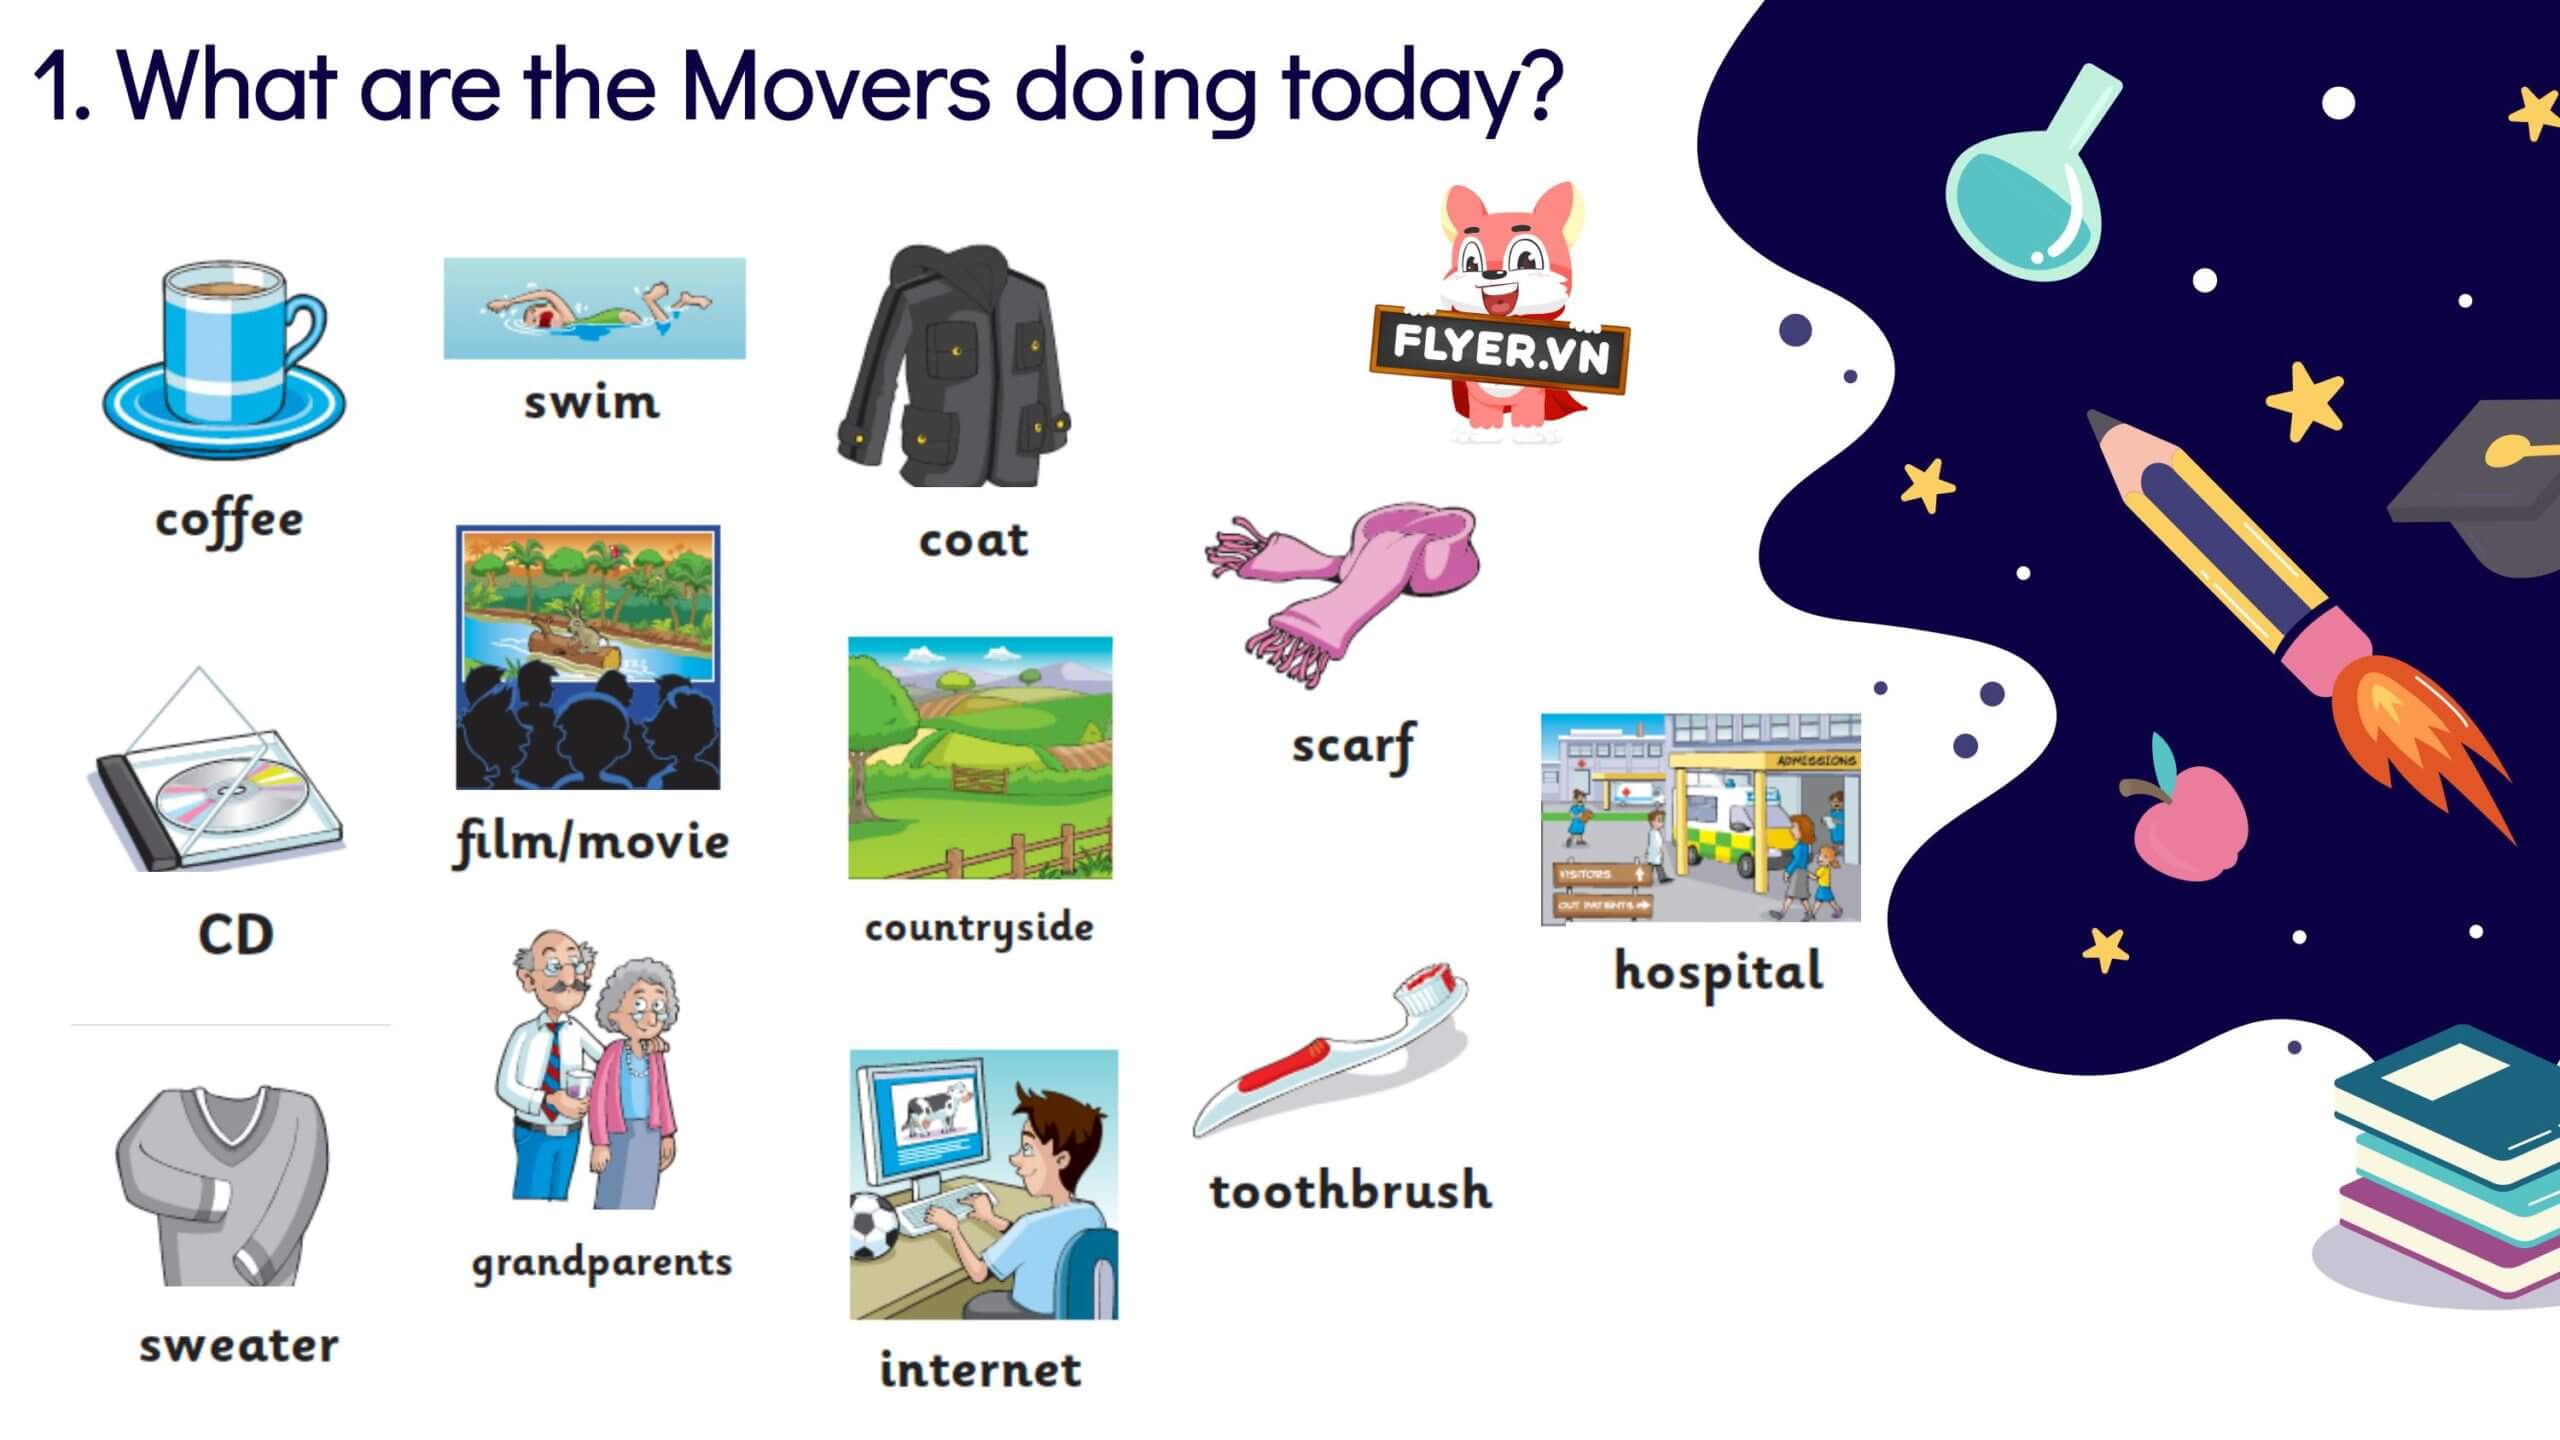  Chủ đề 1: What are the Movers doing today? - Danh sách từ vựng thi A1 Movers